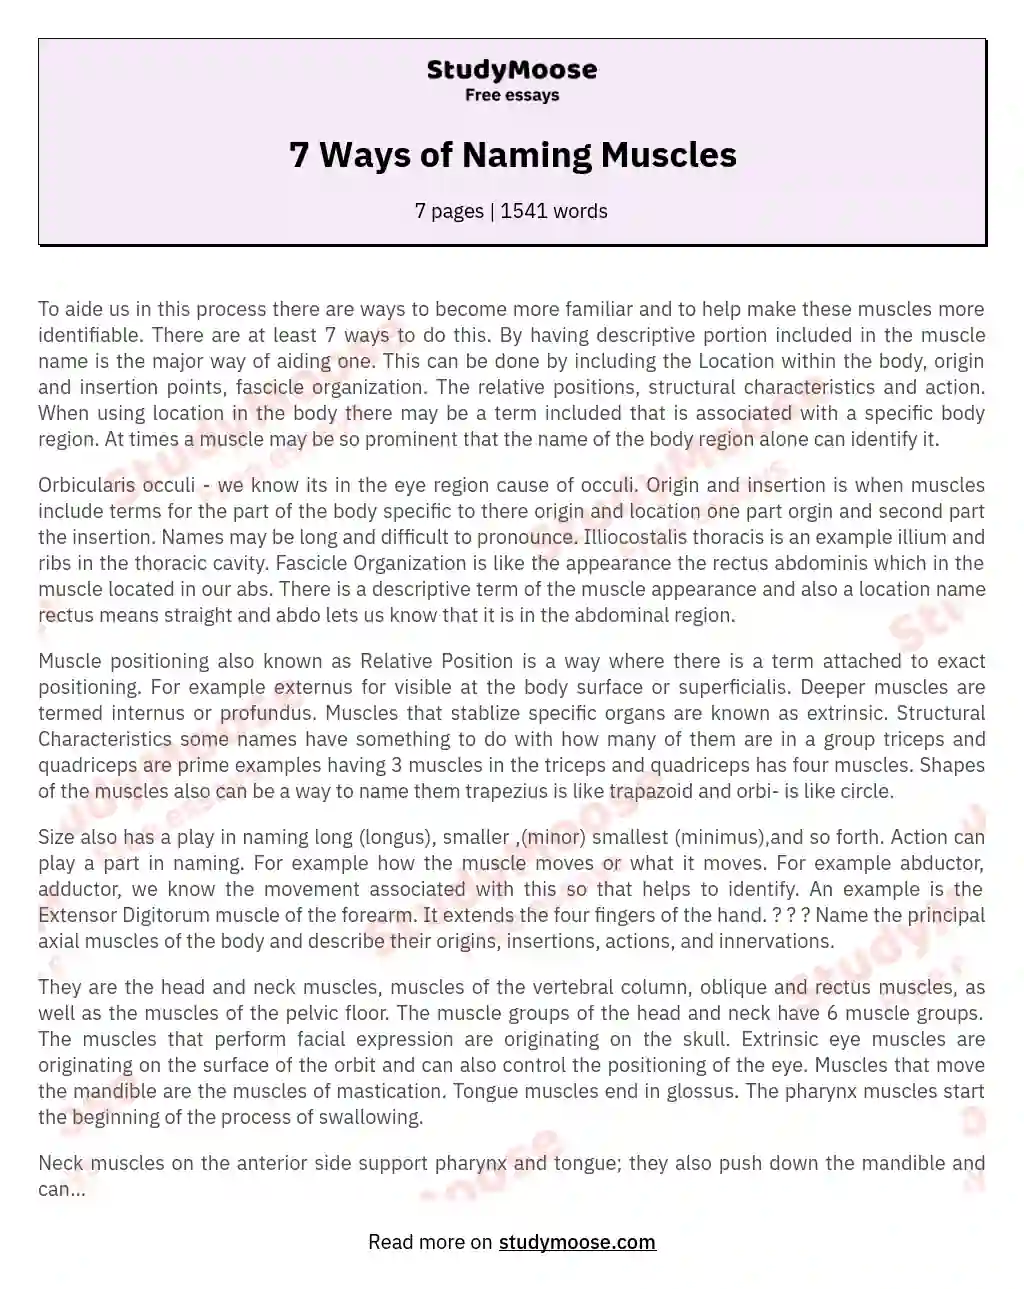 7 Ways of Naming Muscles essay